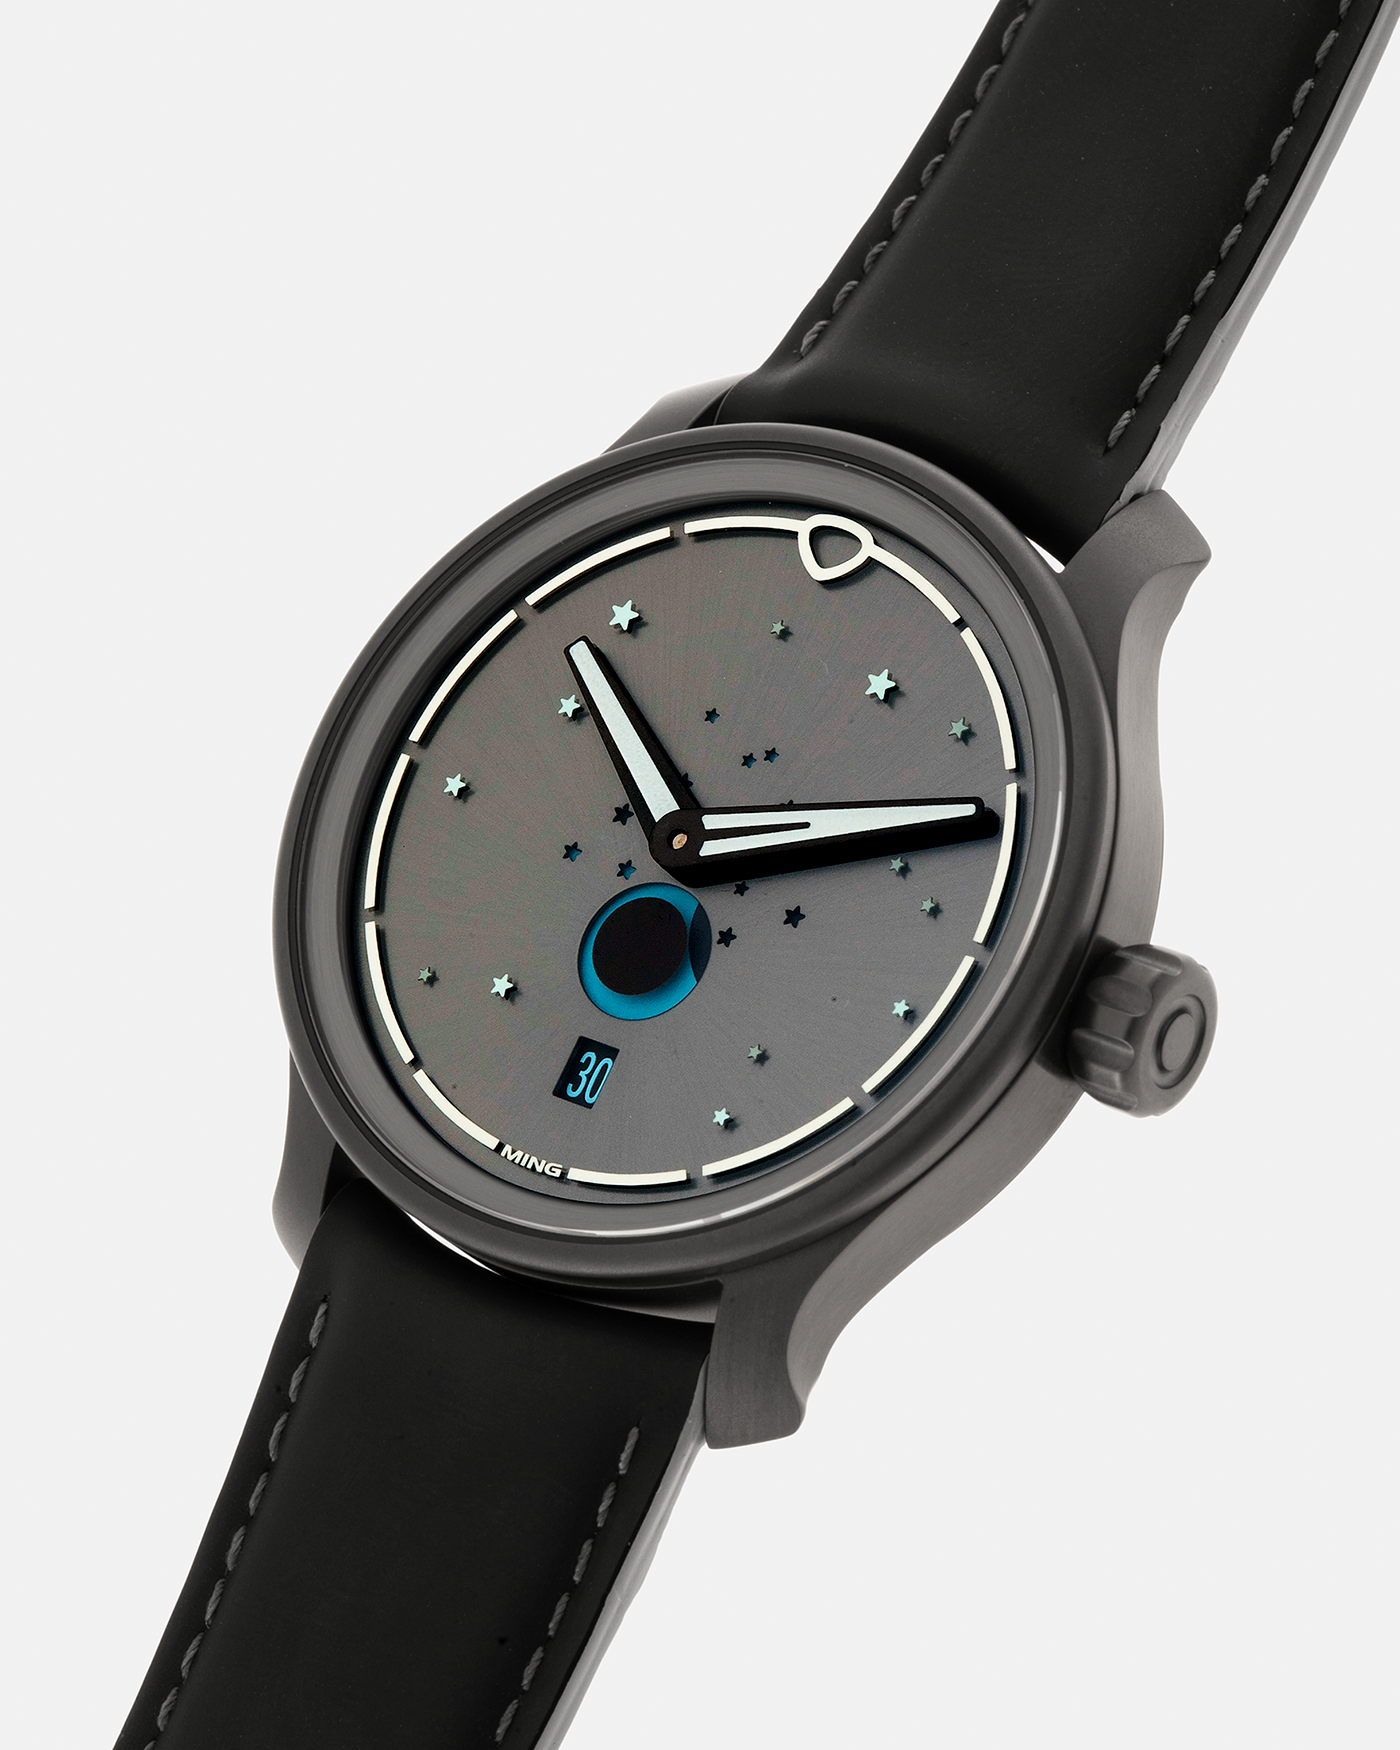 Brand: MING Year: 2023 Model: 37.05 Moonphase Series 2 Special Edition (Special Caves Project), Limited to 50 pieces Material: DLC-Coated Stainless Steel Movement: Heavily Modified Sellita Cal. SW288-1, Manual-Winding Case Diameter: 38mm Lug Width: 20mm Strap: Jean Rousseau Black Rubber with Blue Under Lining for MING with Signed DLC-Coated Keeperless Flying Blade Buckle